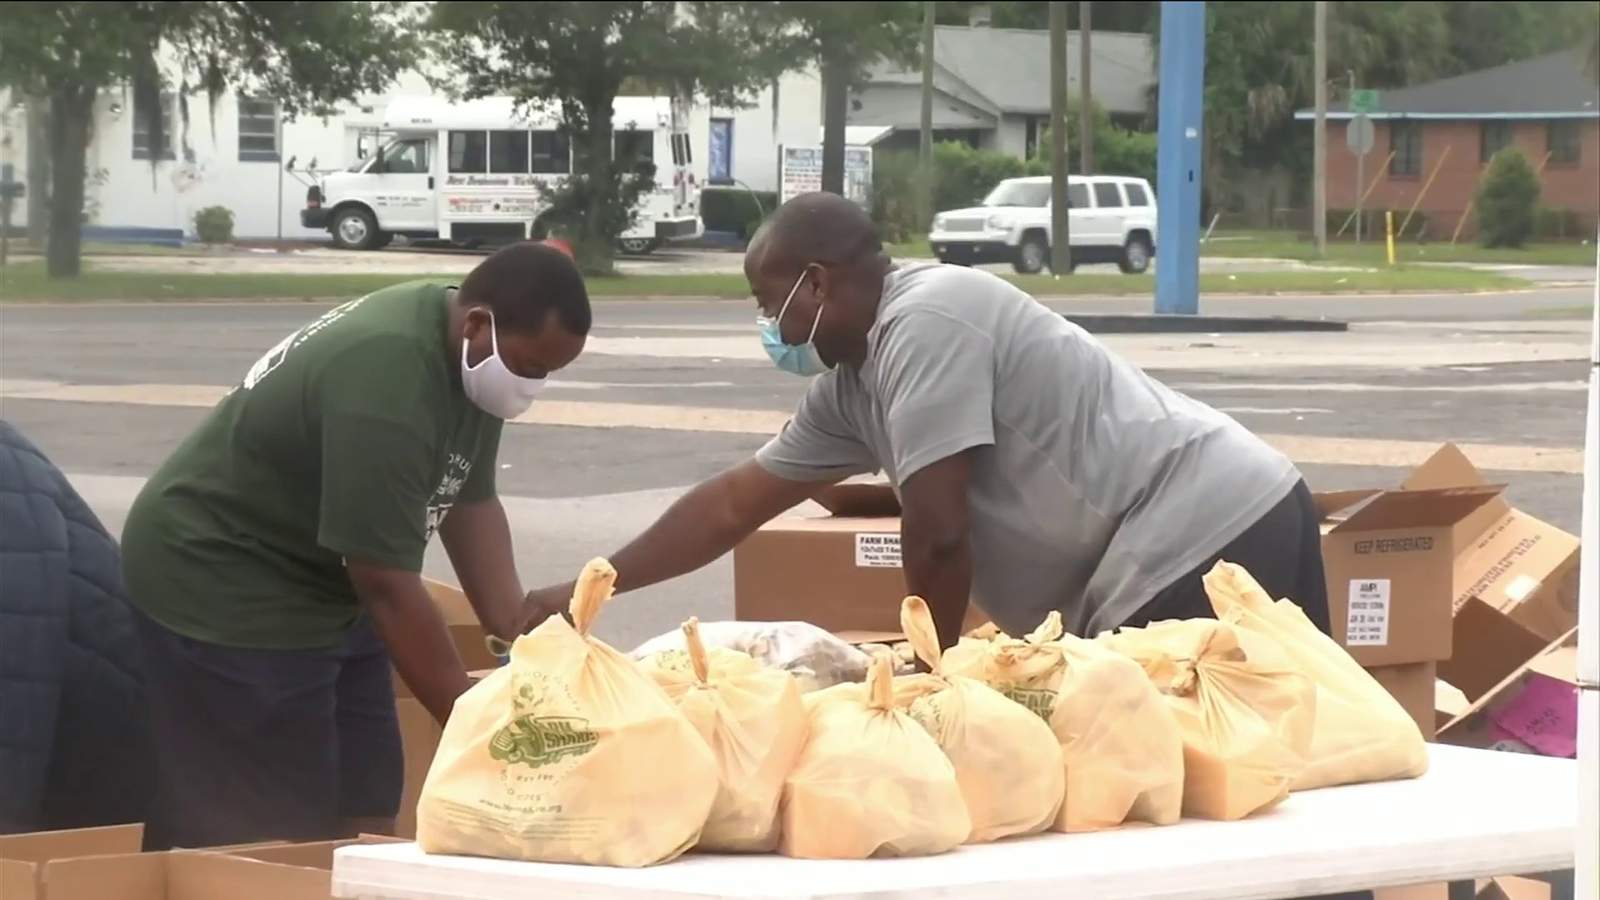 More than 400 carloads of groceries given out at Farm Share event